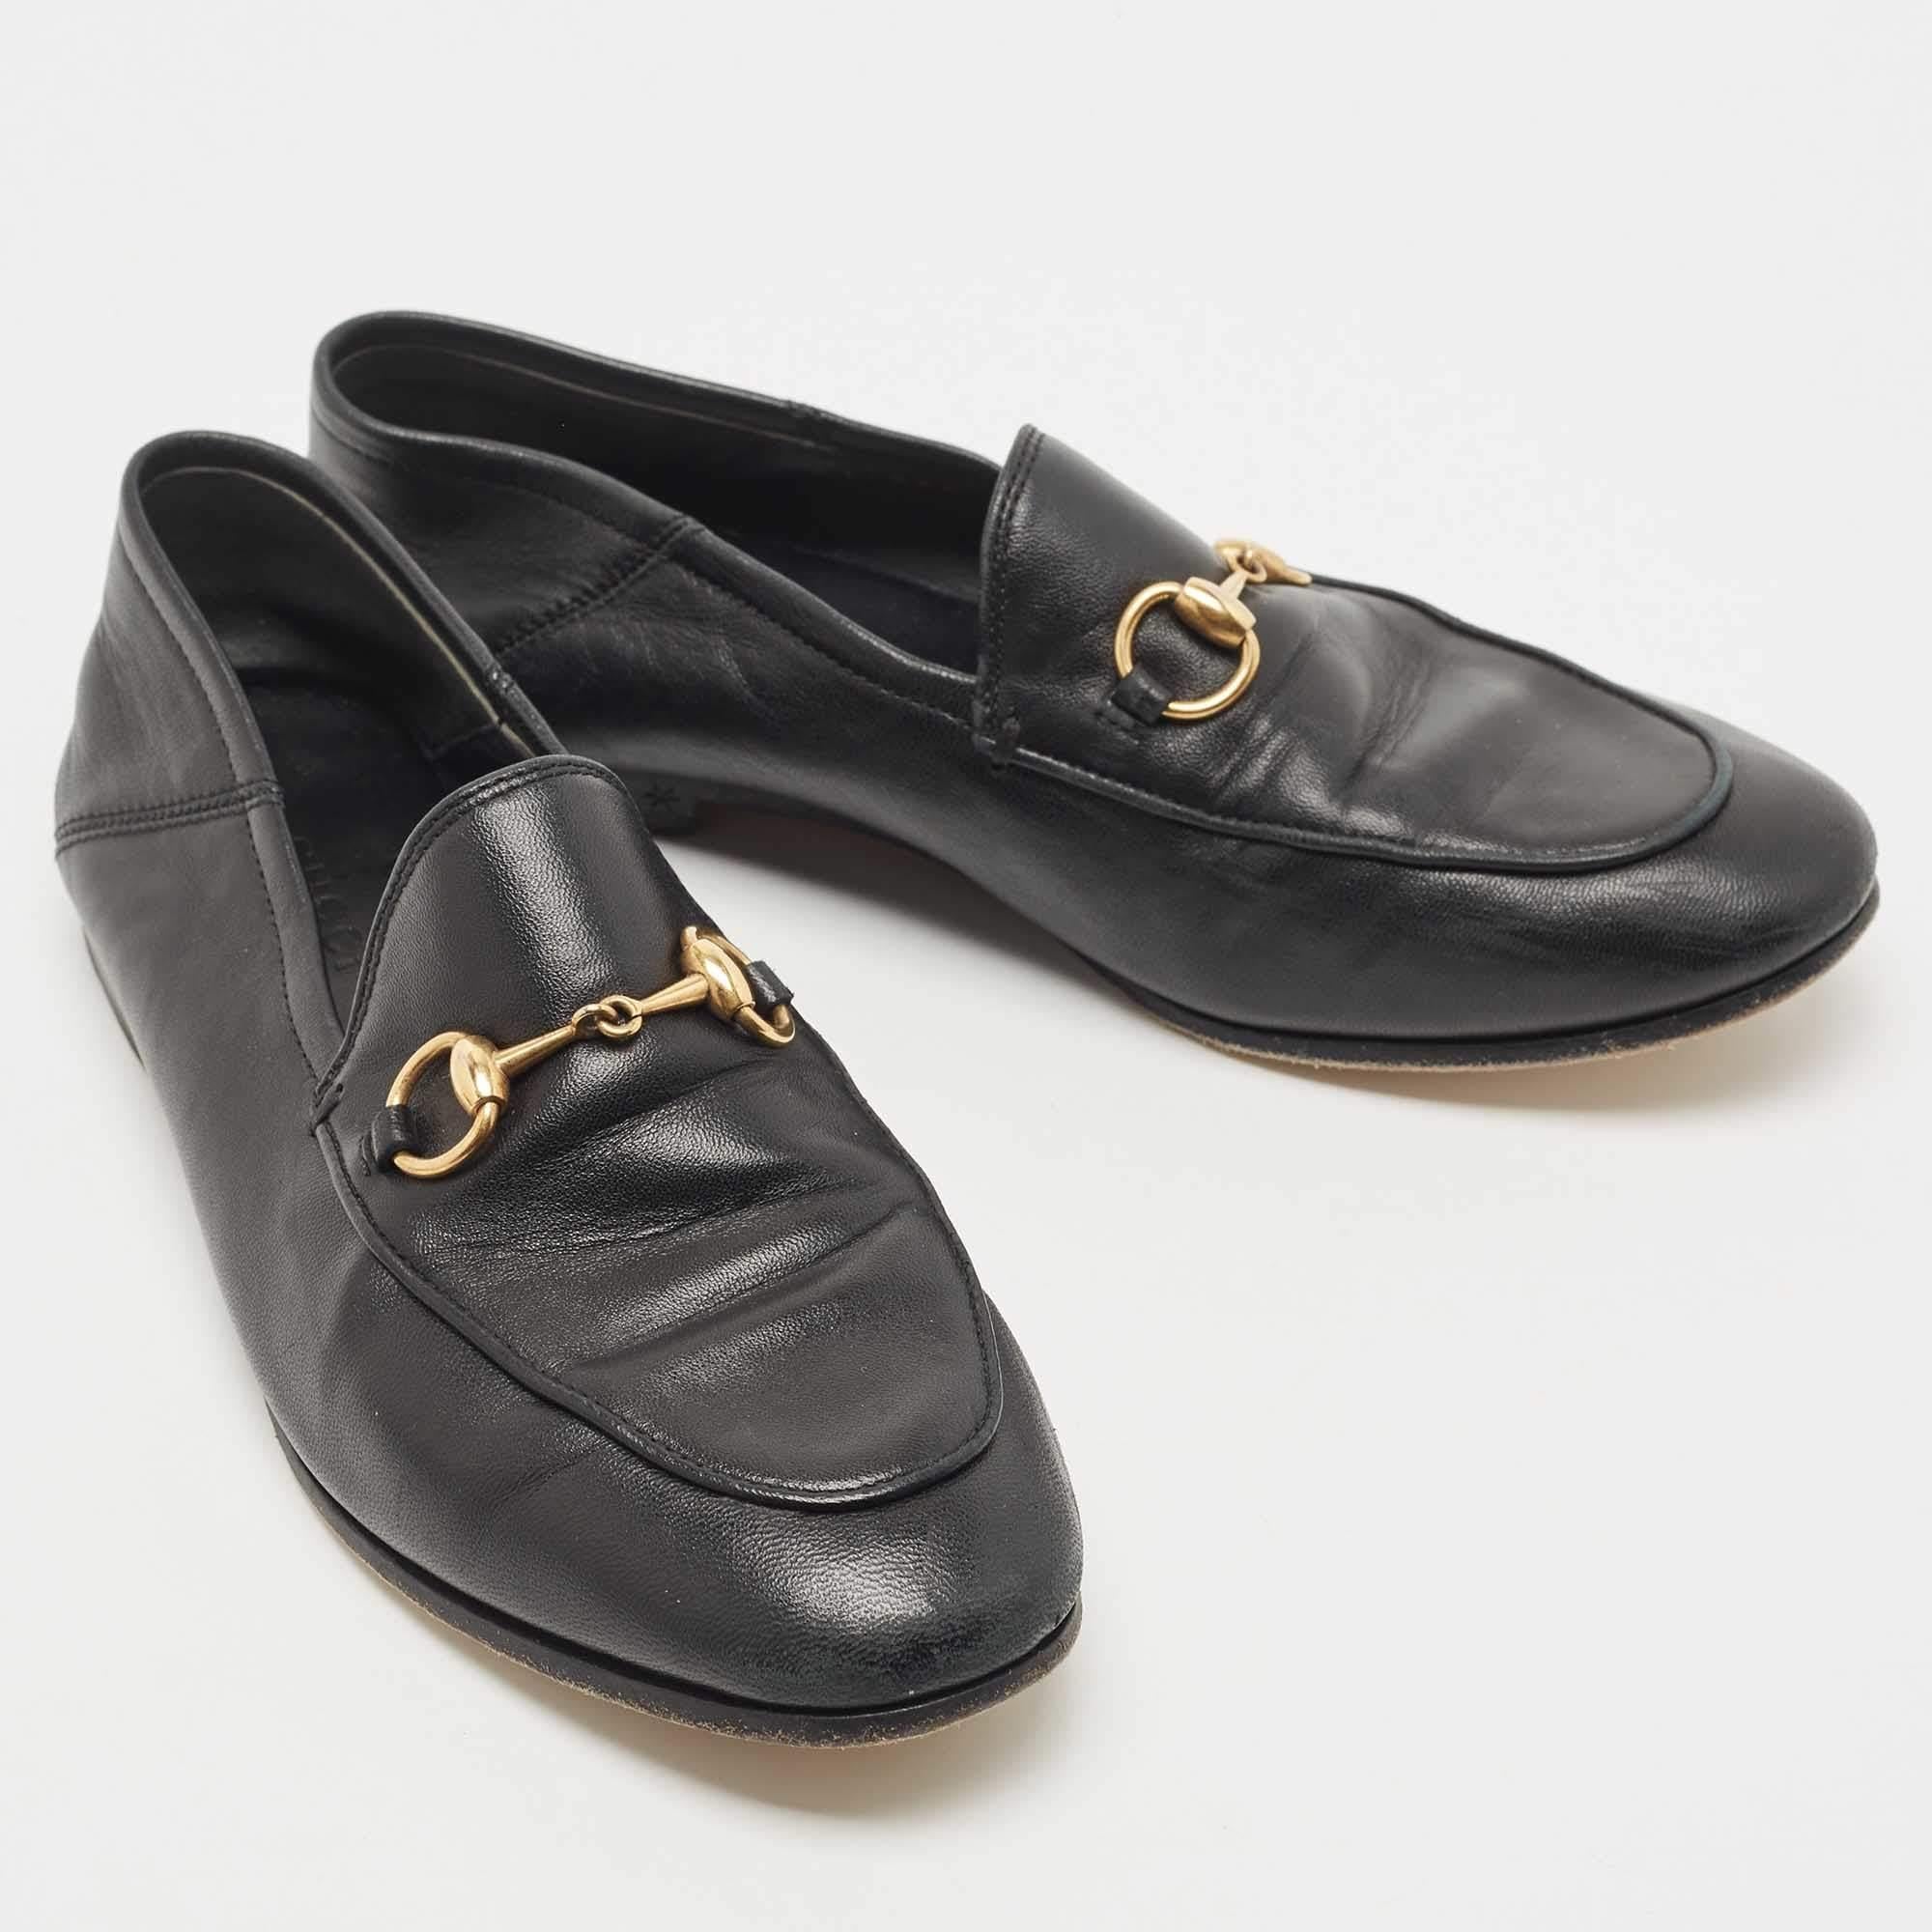 Gucci Black Leather Jordaan Loafers Size 35 1